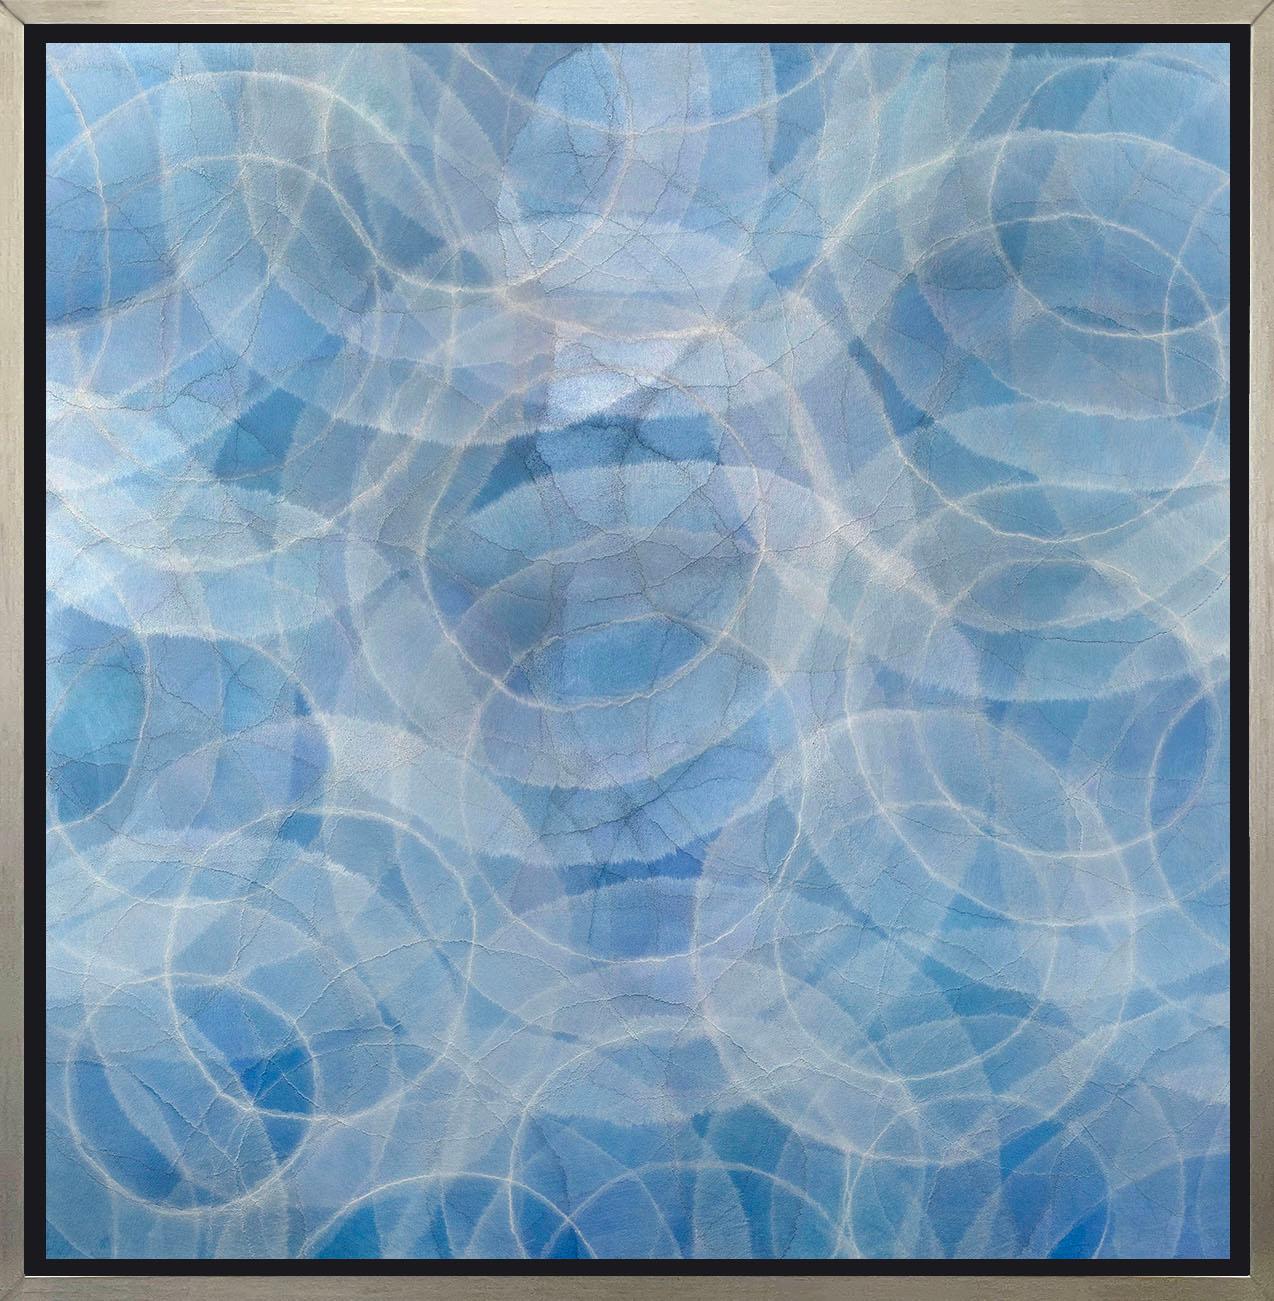 Roger Mudre Abstract Print - "Boeotia, " Framed Limited Edition Giclee Print, 24" x 24"